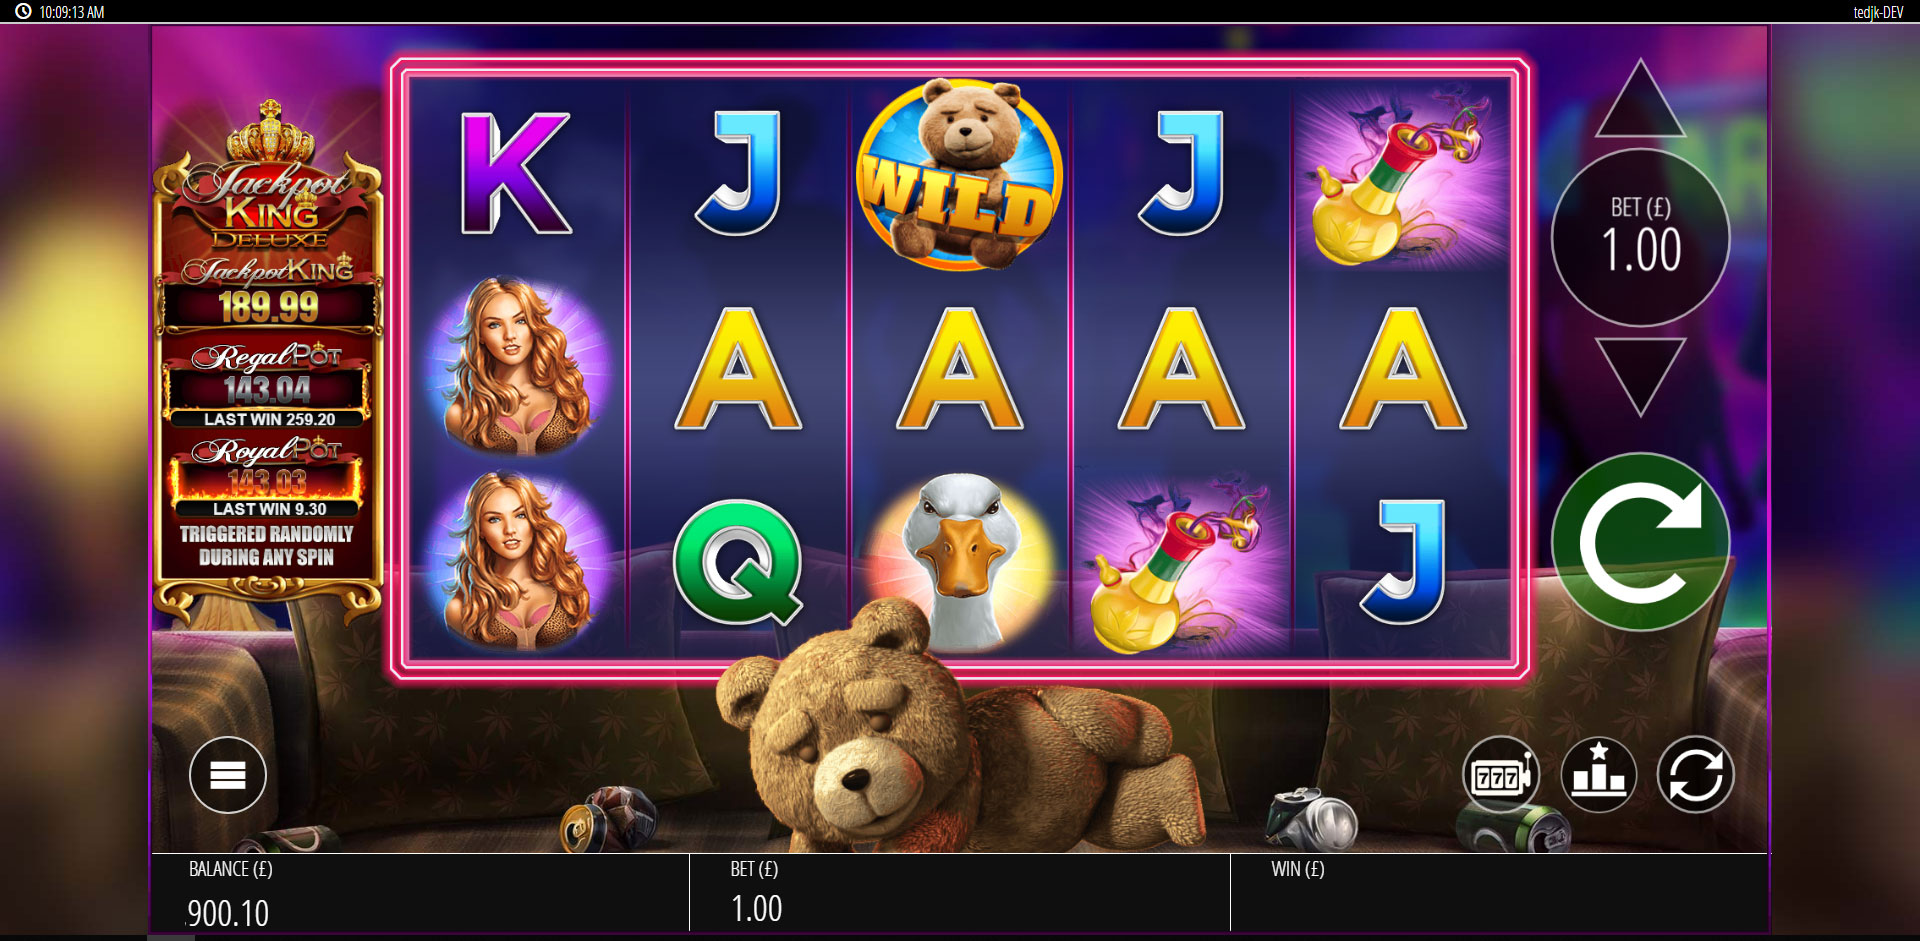 ted jackpot king